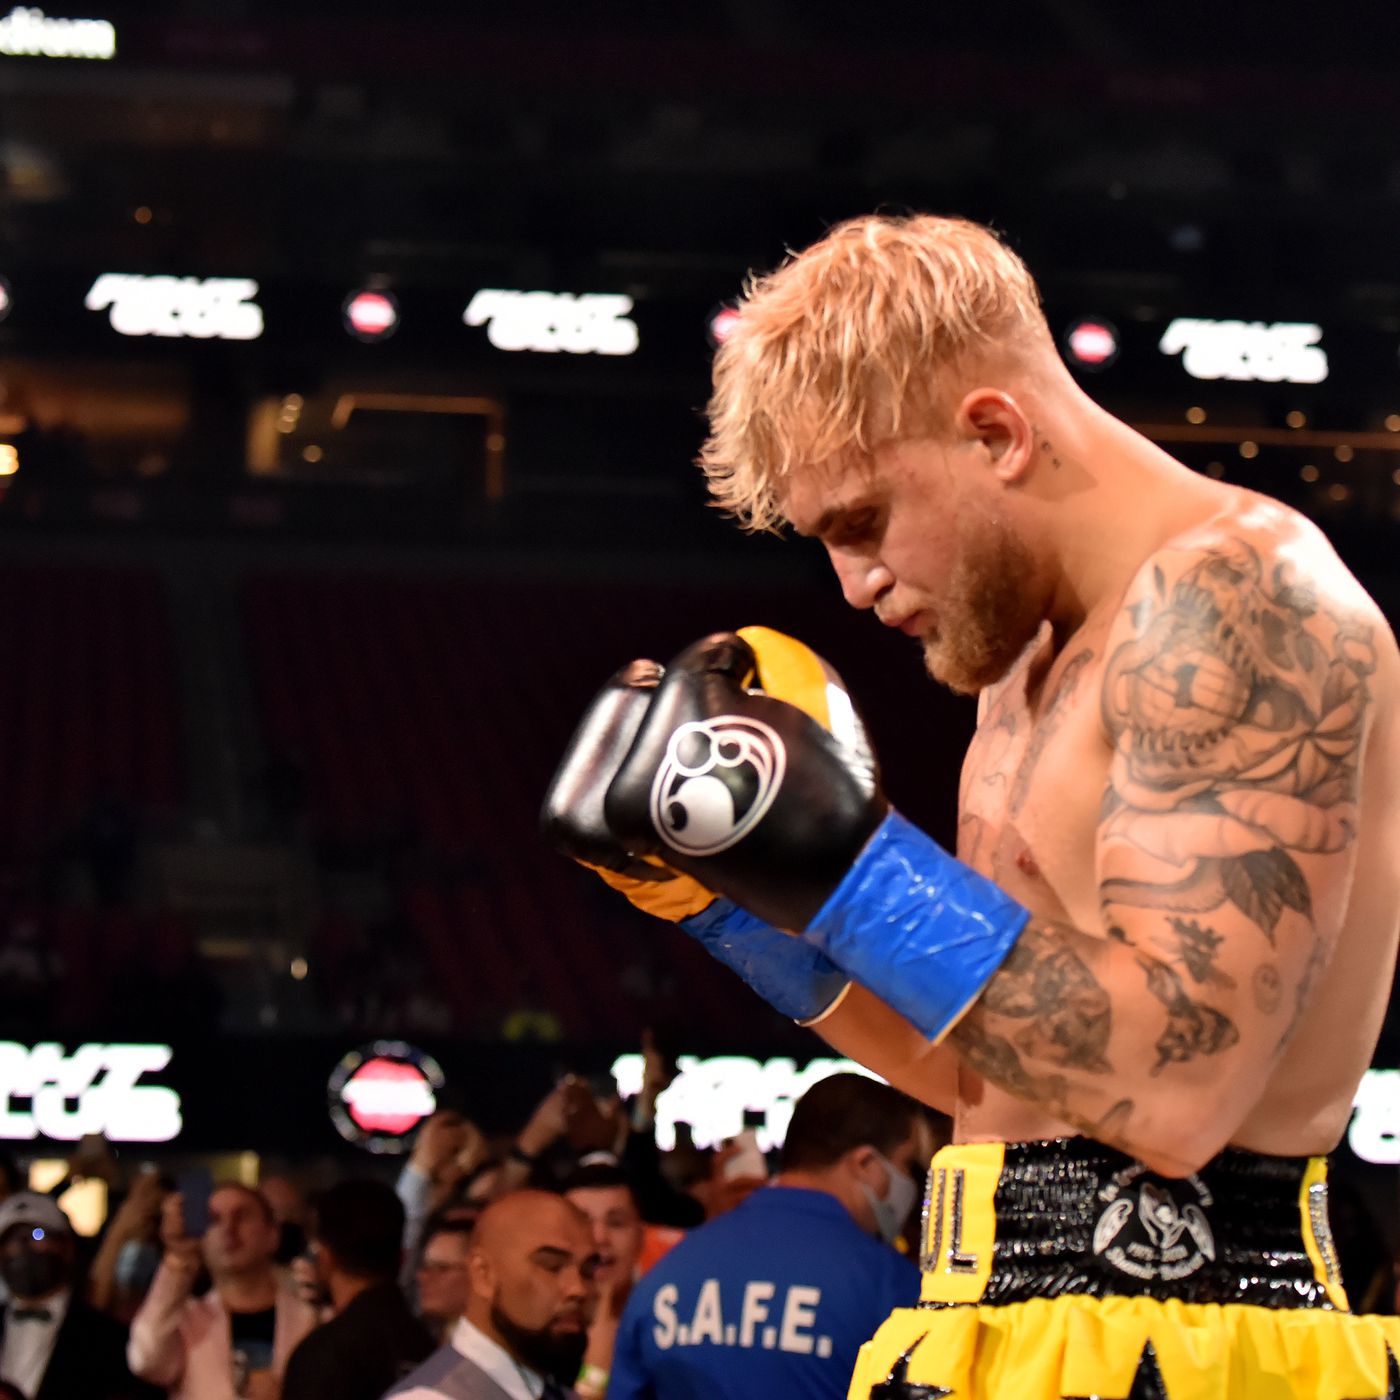 Morning Report: Jake Paul blasts Daniel Cormier: 'I'll beat the f*** out of your fat ass too, just like Stipe did'